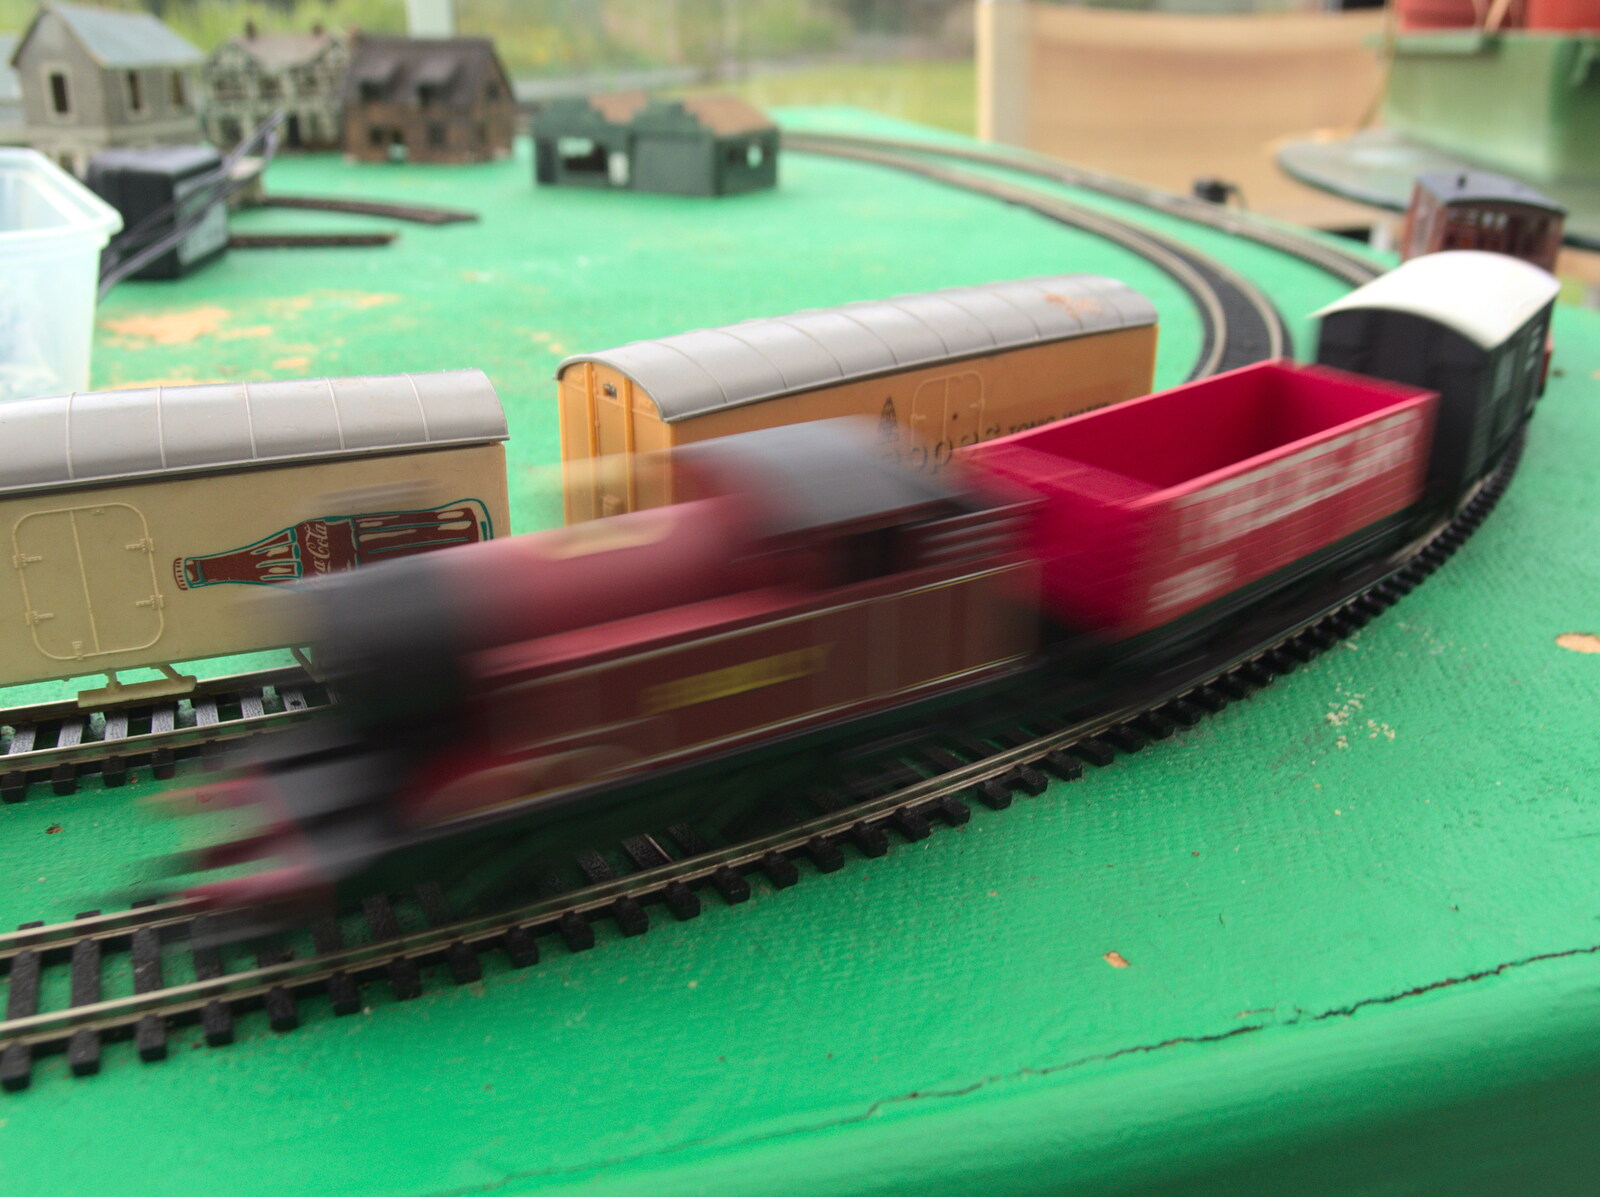 Grandad's train set in action from A Busy Day and a Church Fair, Diss, Norfolk - 28th June 2014